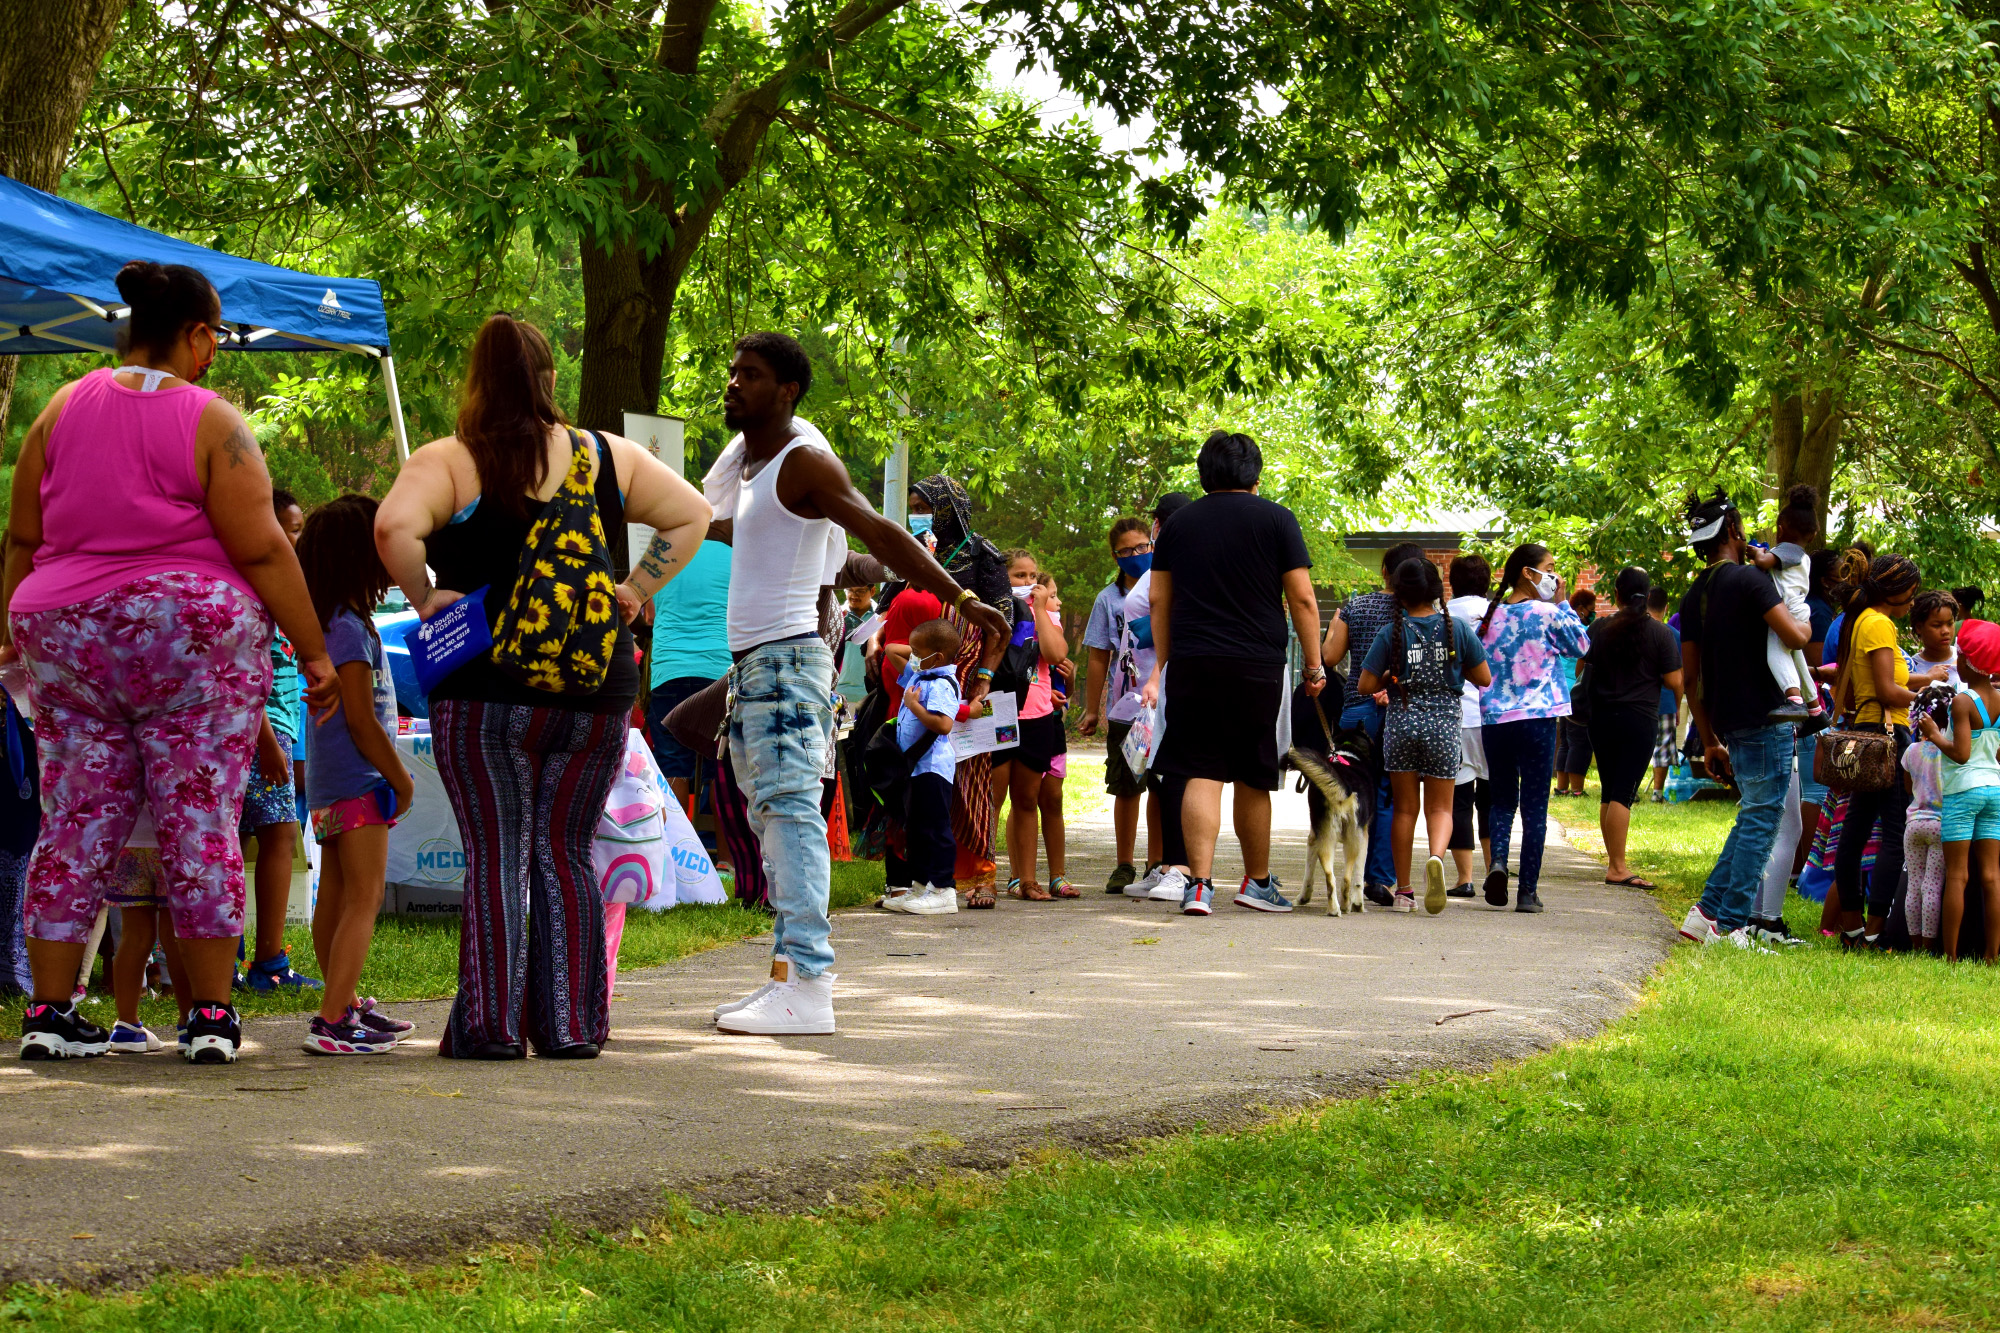 Crowds line up for backpacks and school supplies at Marquette Community Day in Dutchtown, St. Louis, MO.